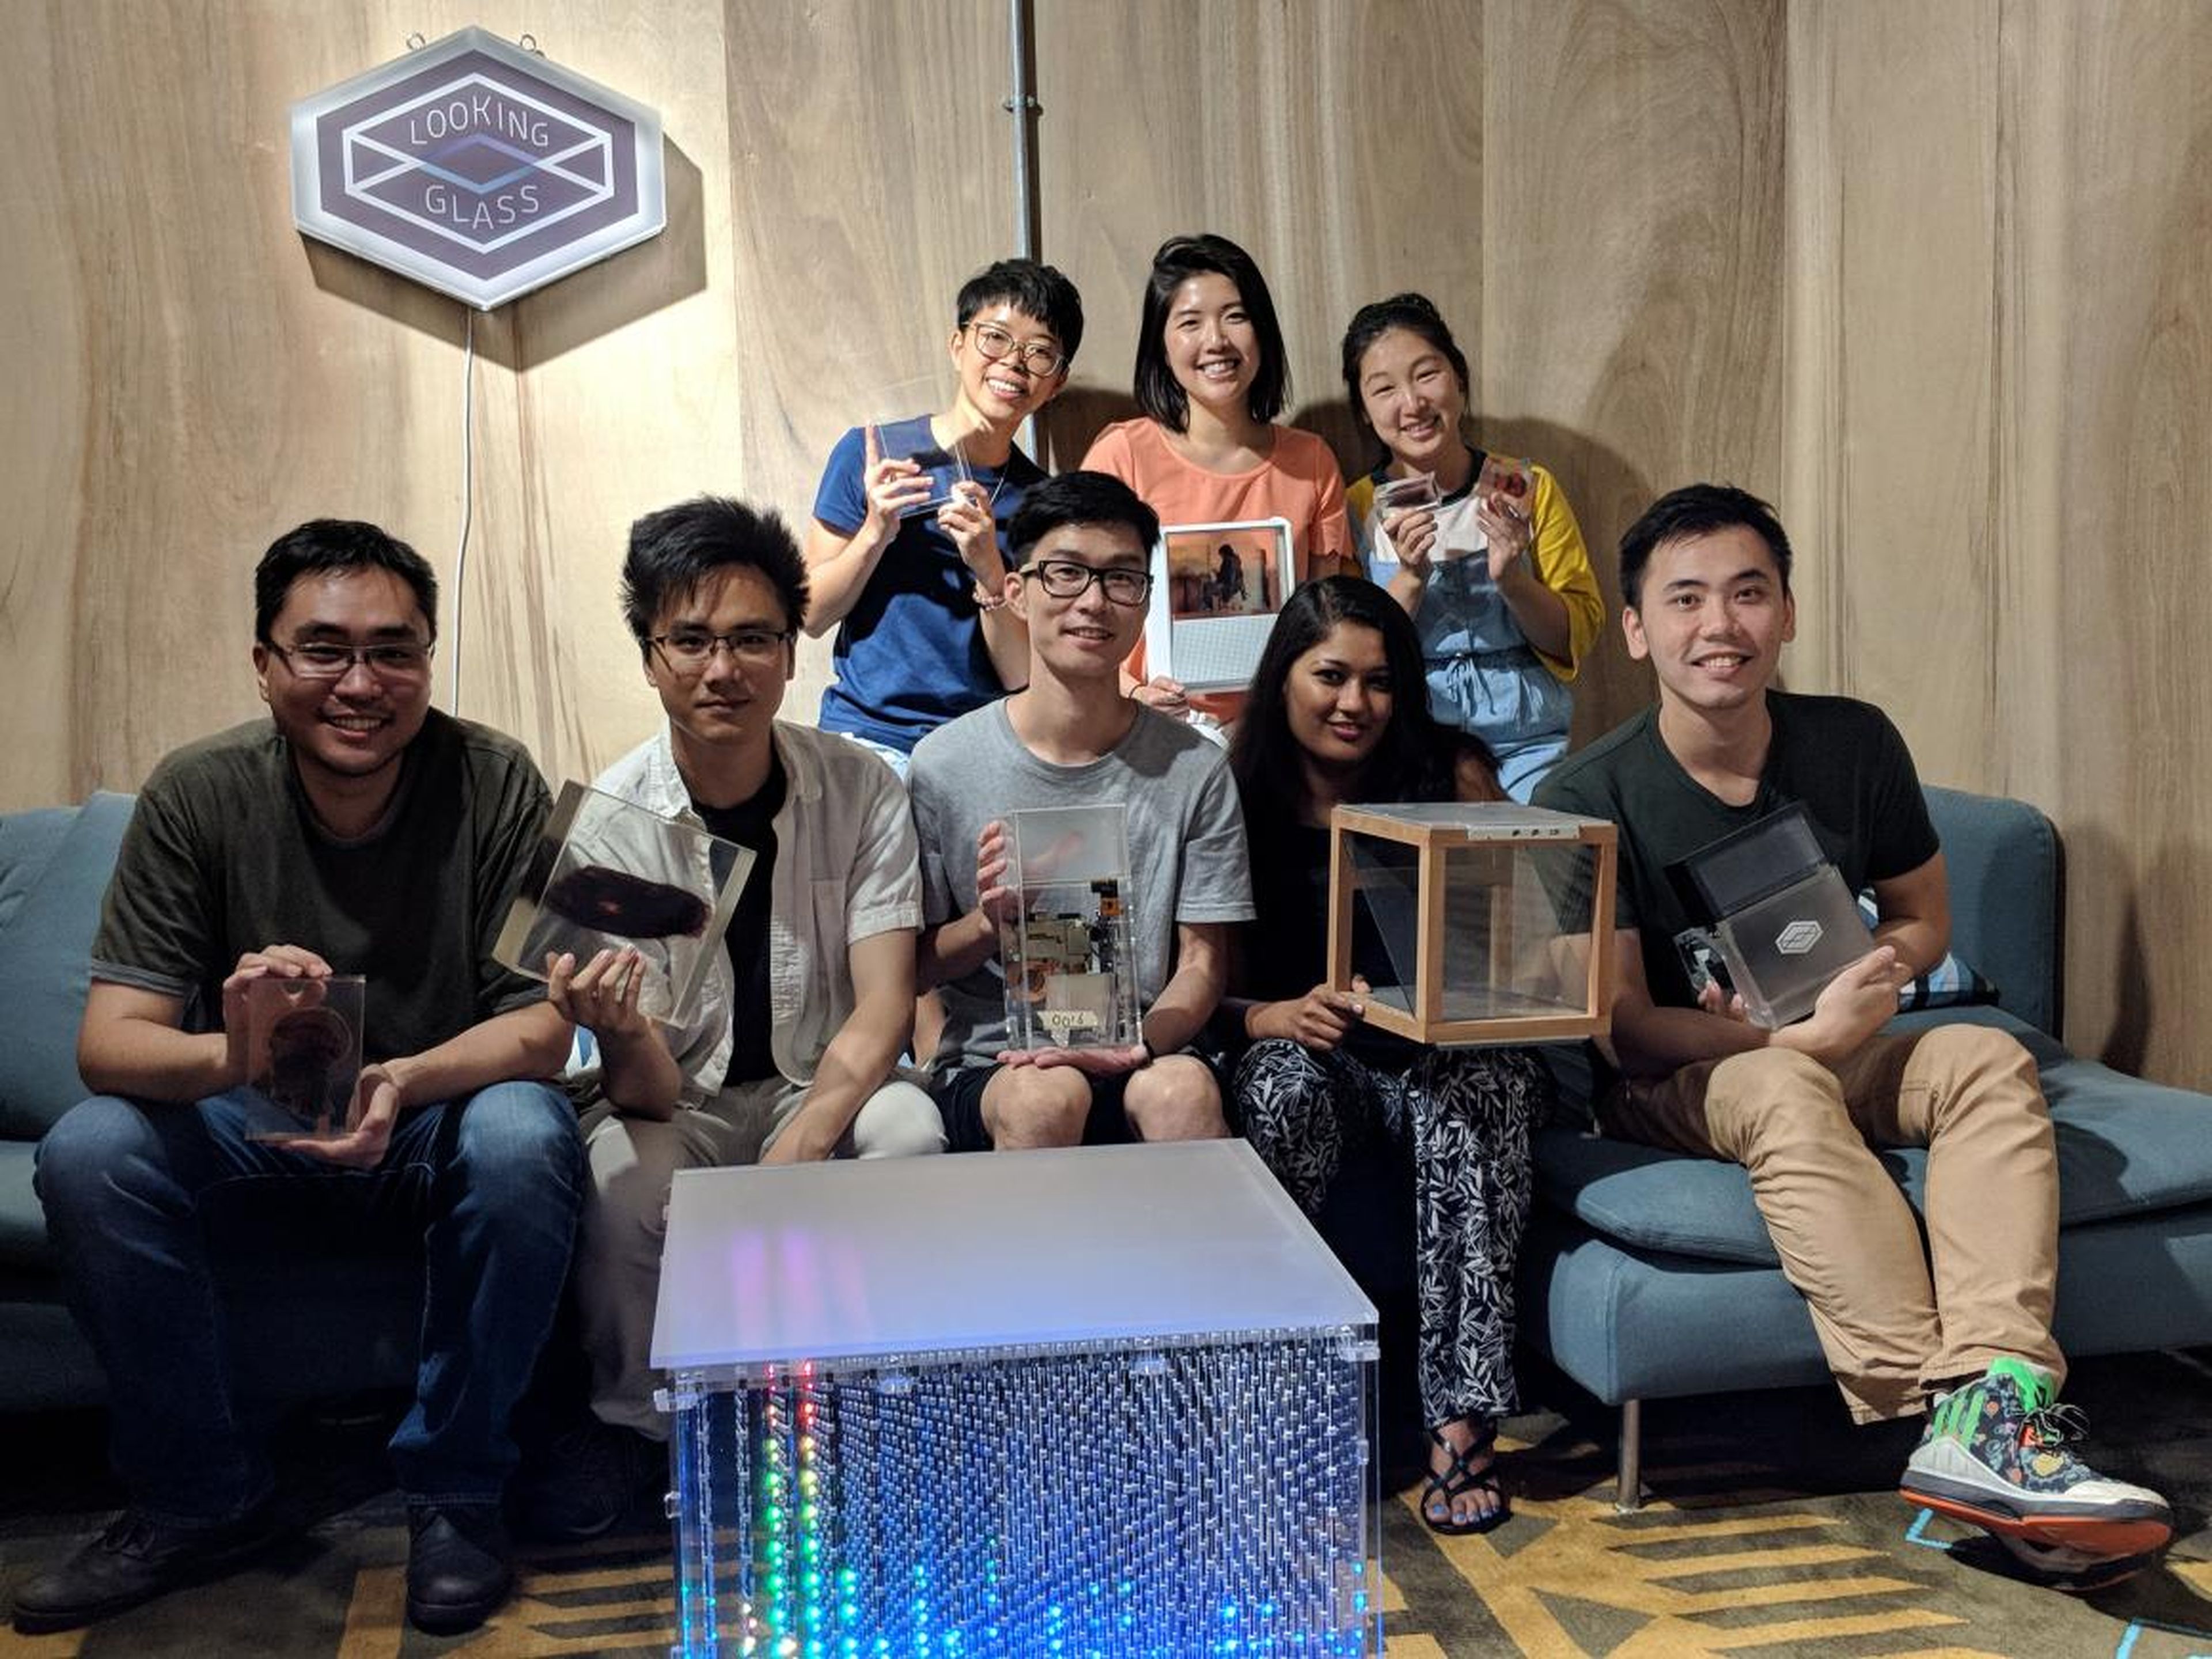 Looking Glass' CEO said the company went through hundreds of prototypes before finalizing their design. Here's the Hong Kong office holding some of them.